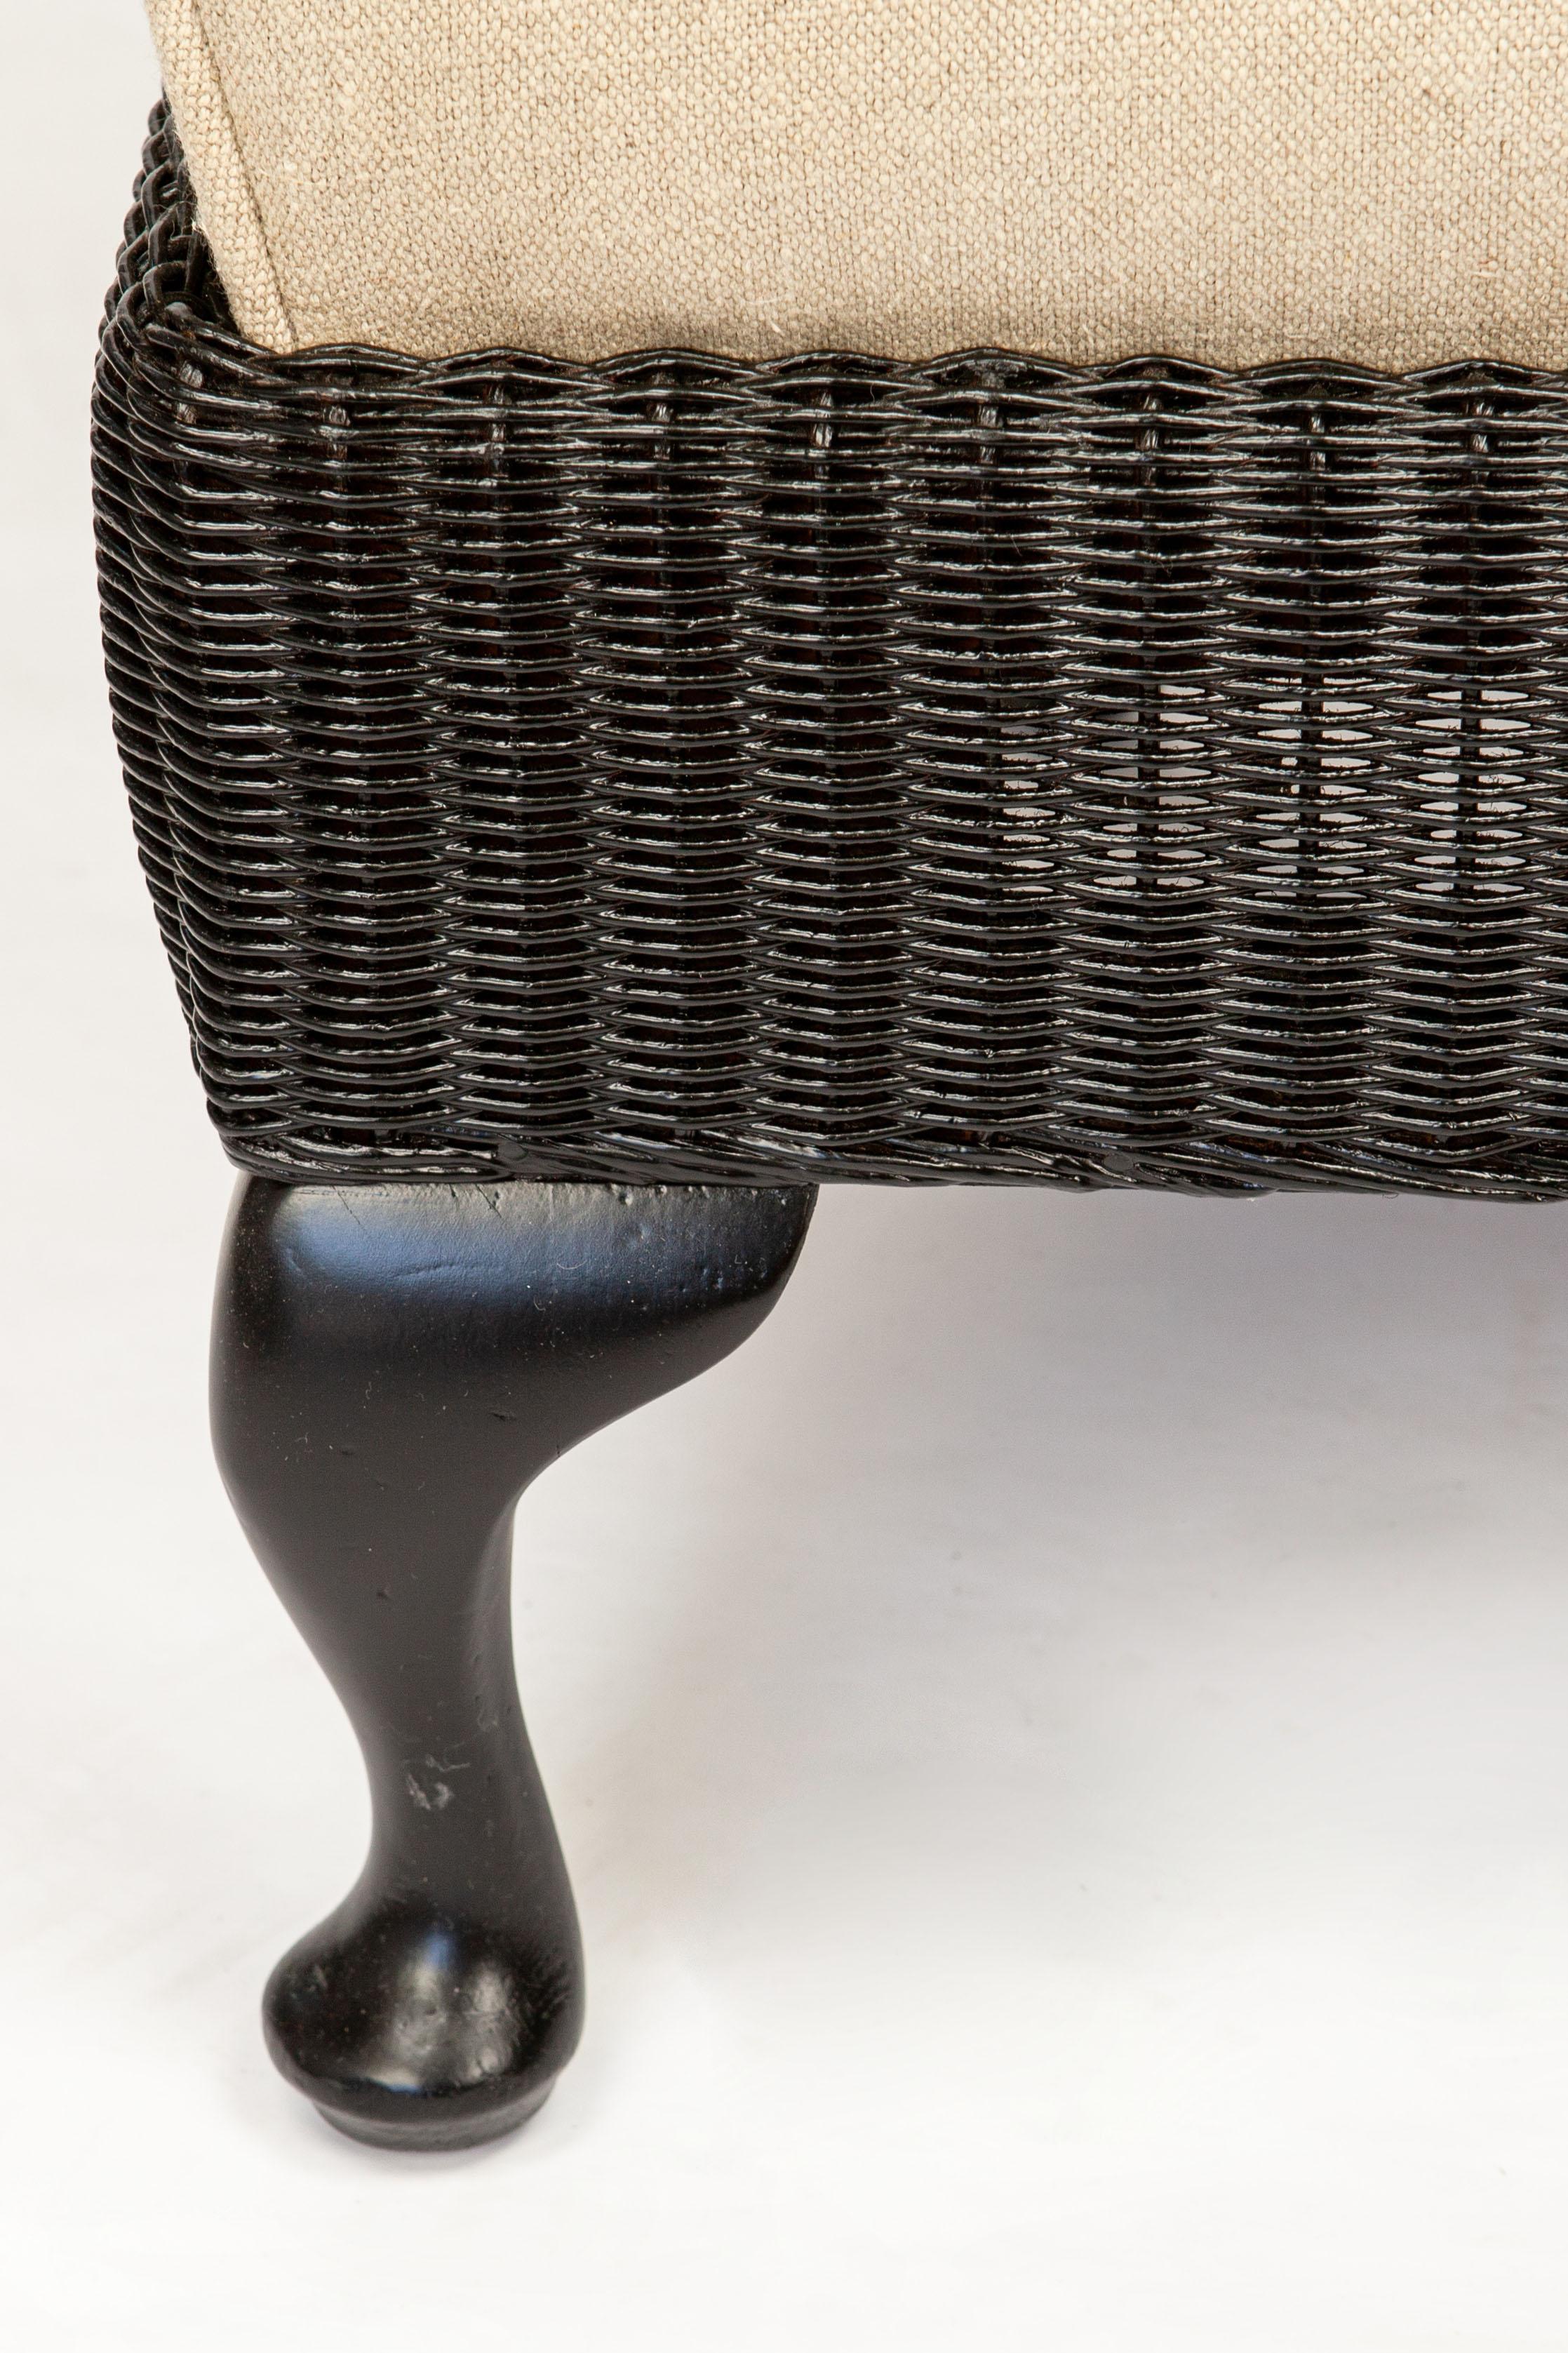 20th Century Antique Lloyd Loom Wicker Slipper Chair, Newly Painted in Black Lacquer